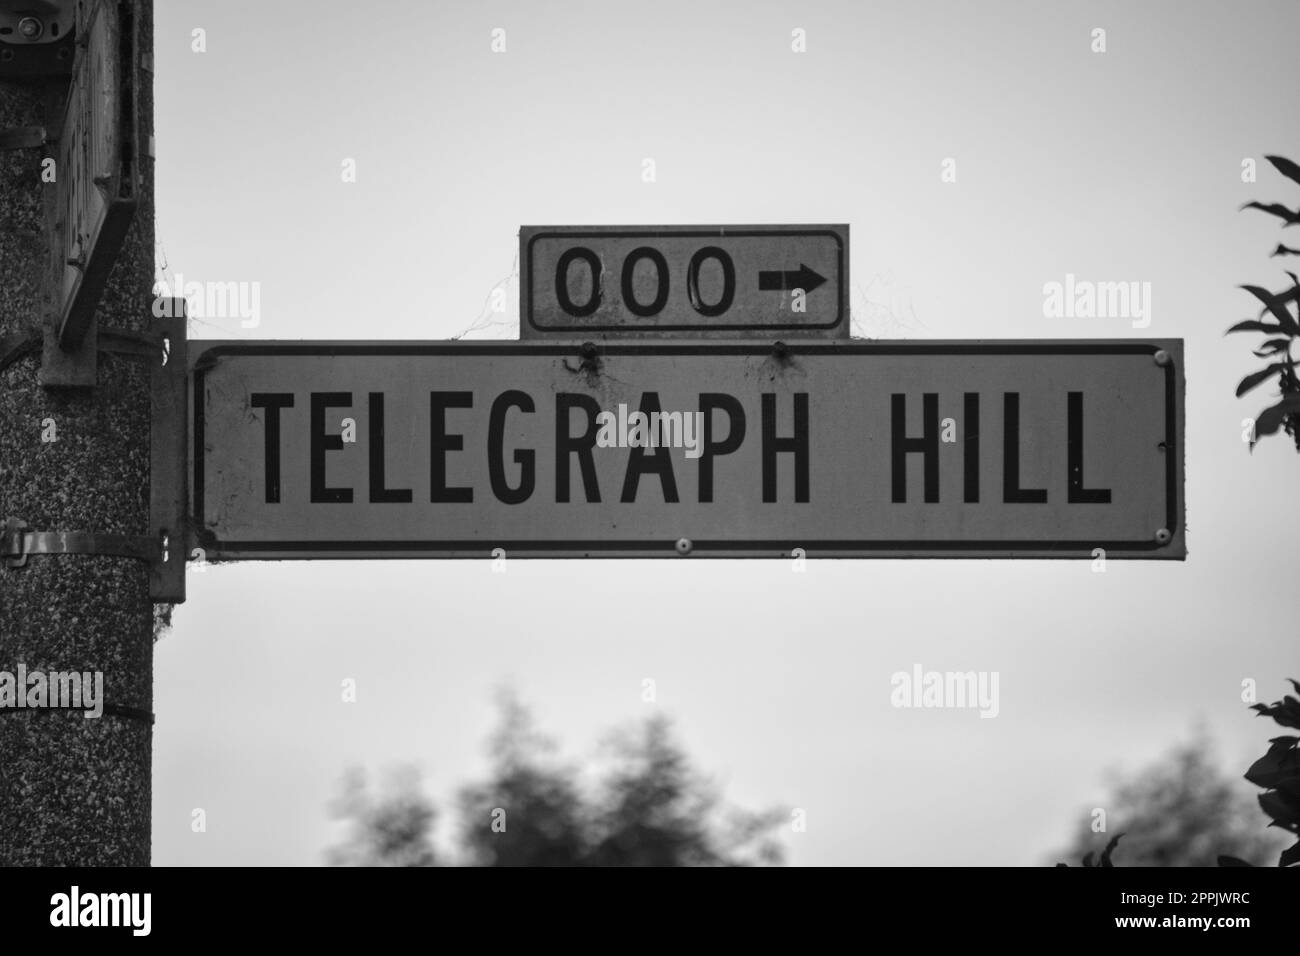 Street sign of Telegraph Hill in San Francisco, California United States in black and white Stock Photo